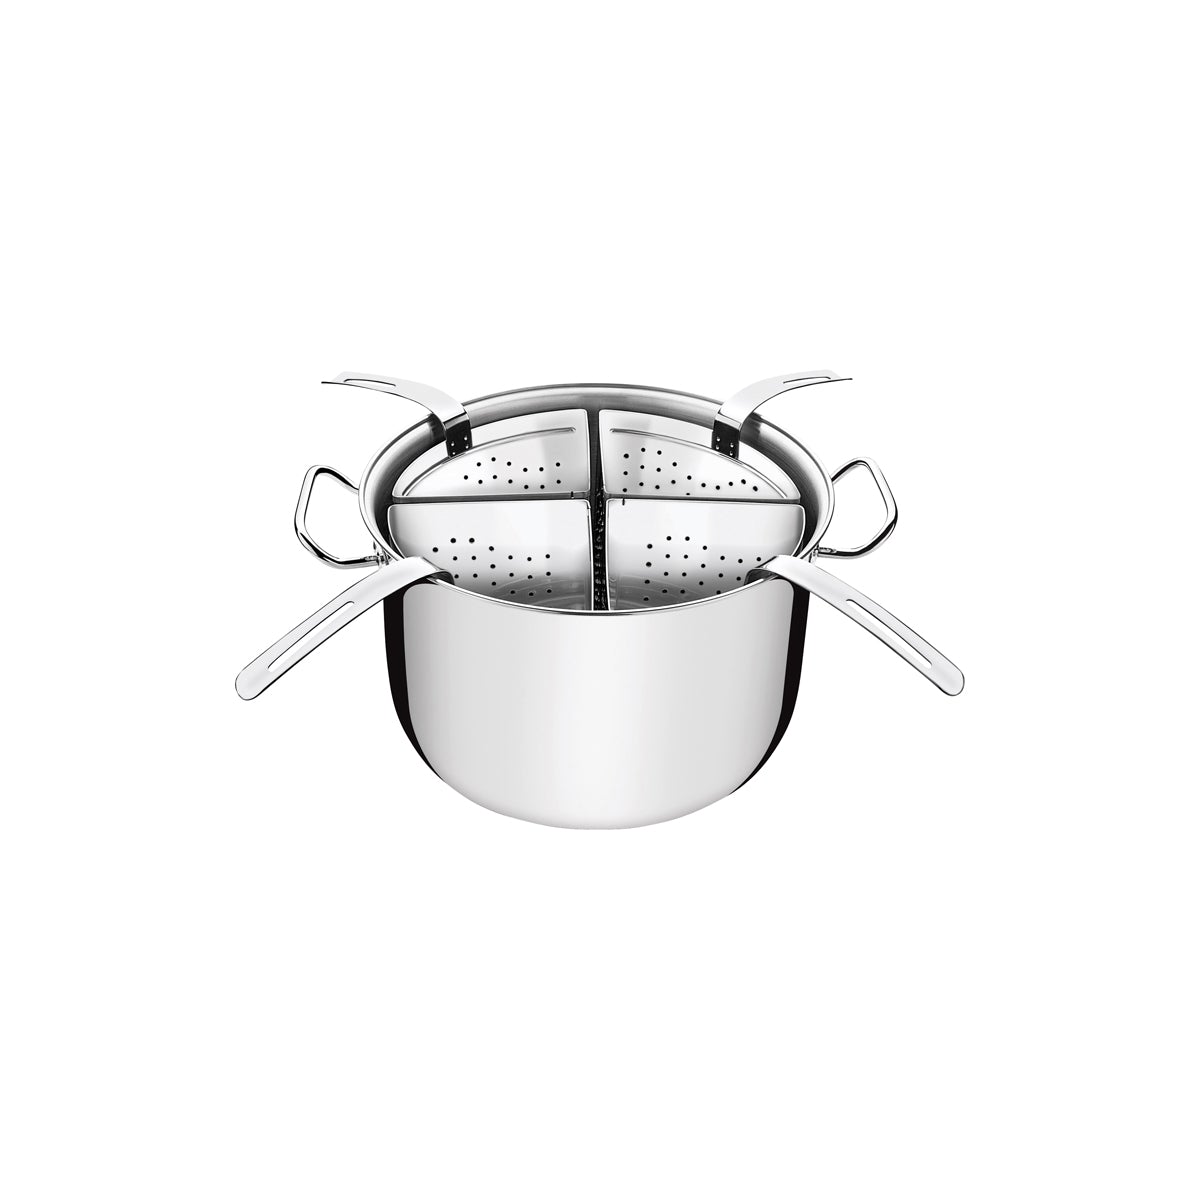 TM65620/411 Tramontina Professional Stock Pot with 4 x Pasta Inserts Stainless Steel 300mm Tomkin Australia Hospitality Supplies